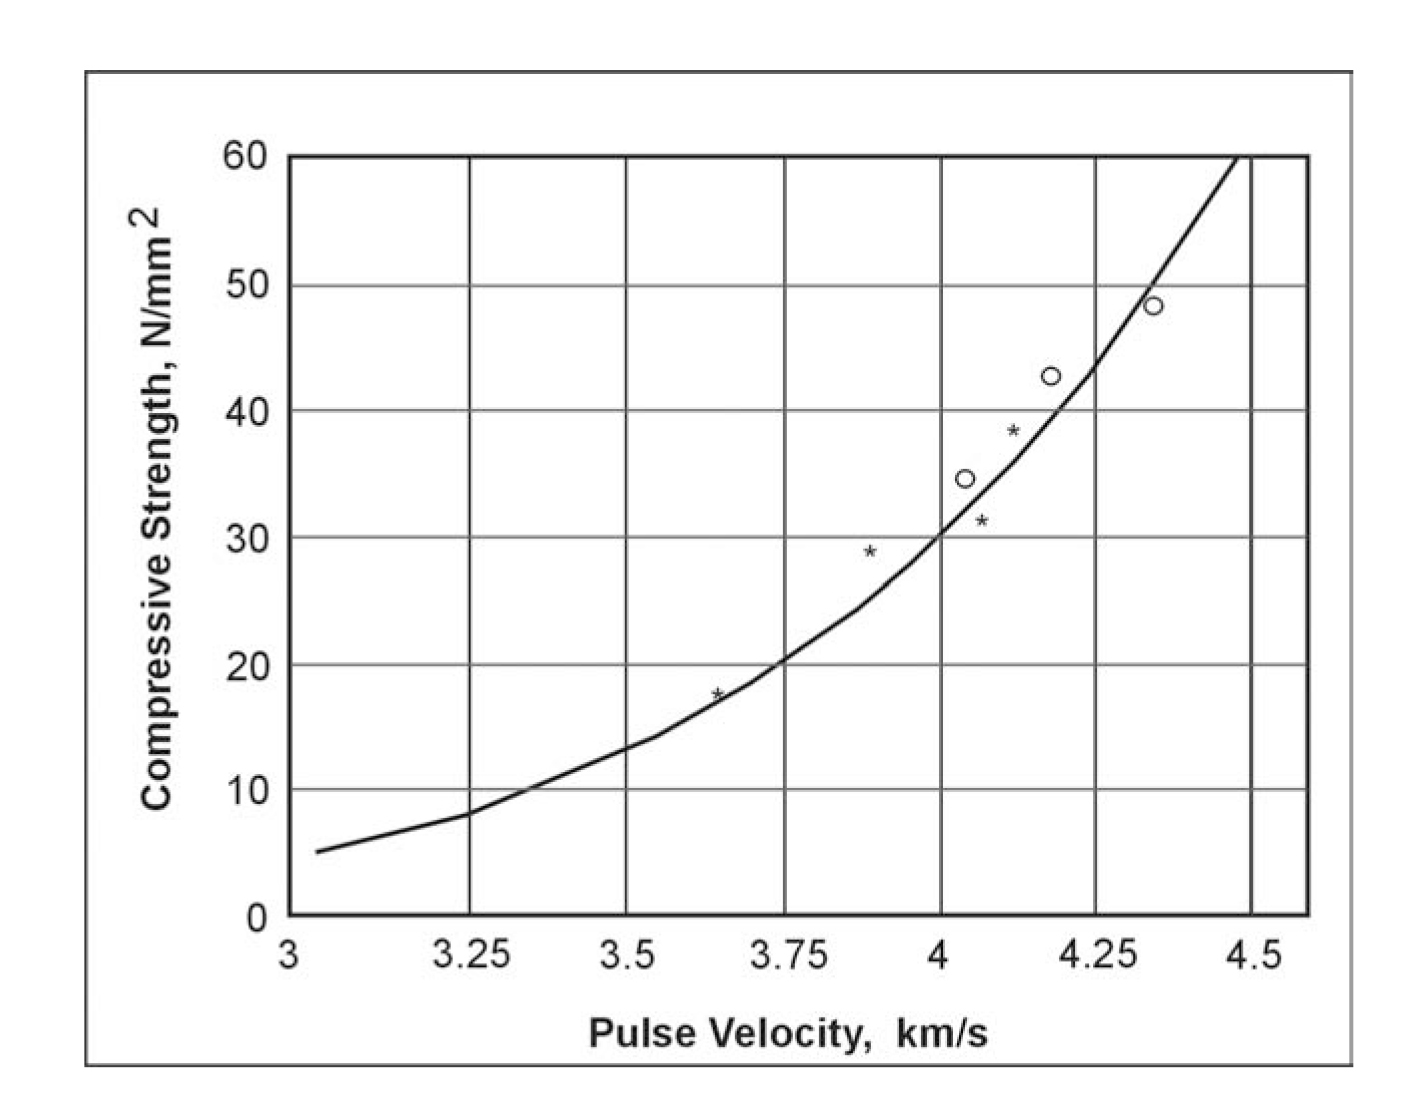 Relation between pulse velocity and compressive strength.